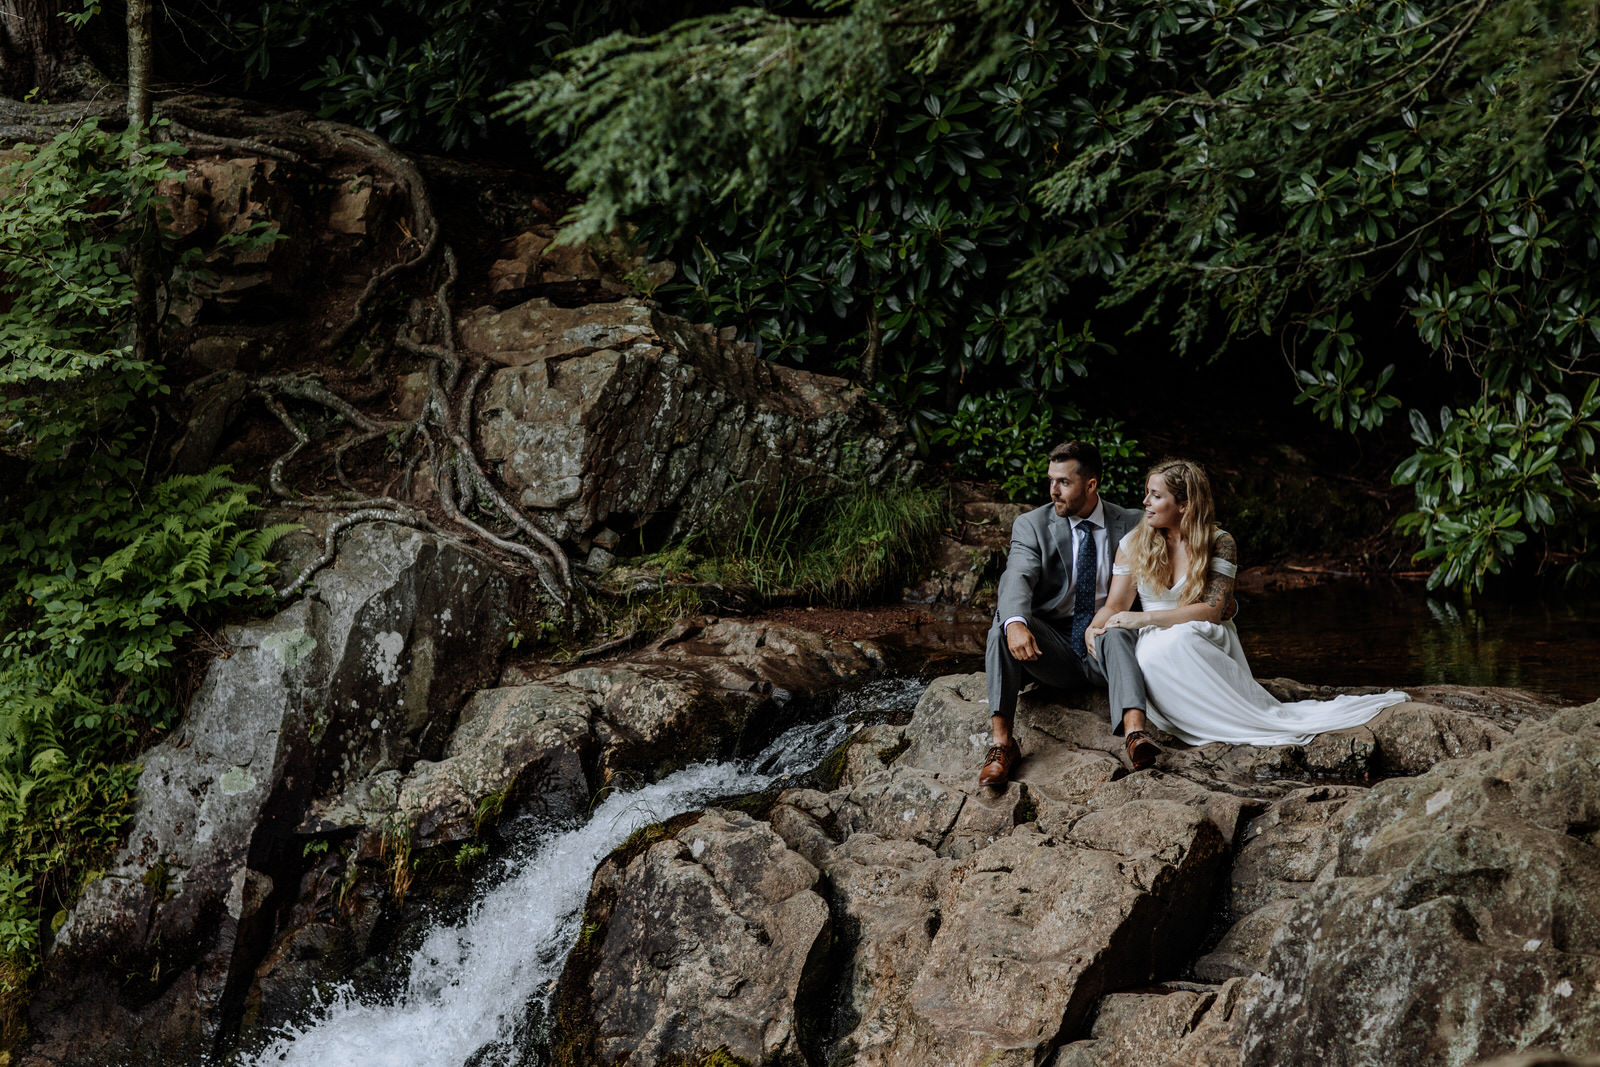 Man and woman dressed up in wedding attire sitting on top of waterfall in Hickory Run State Park